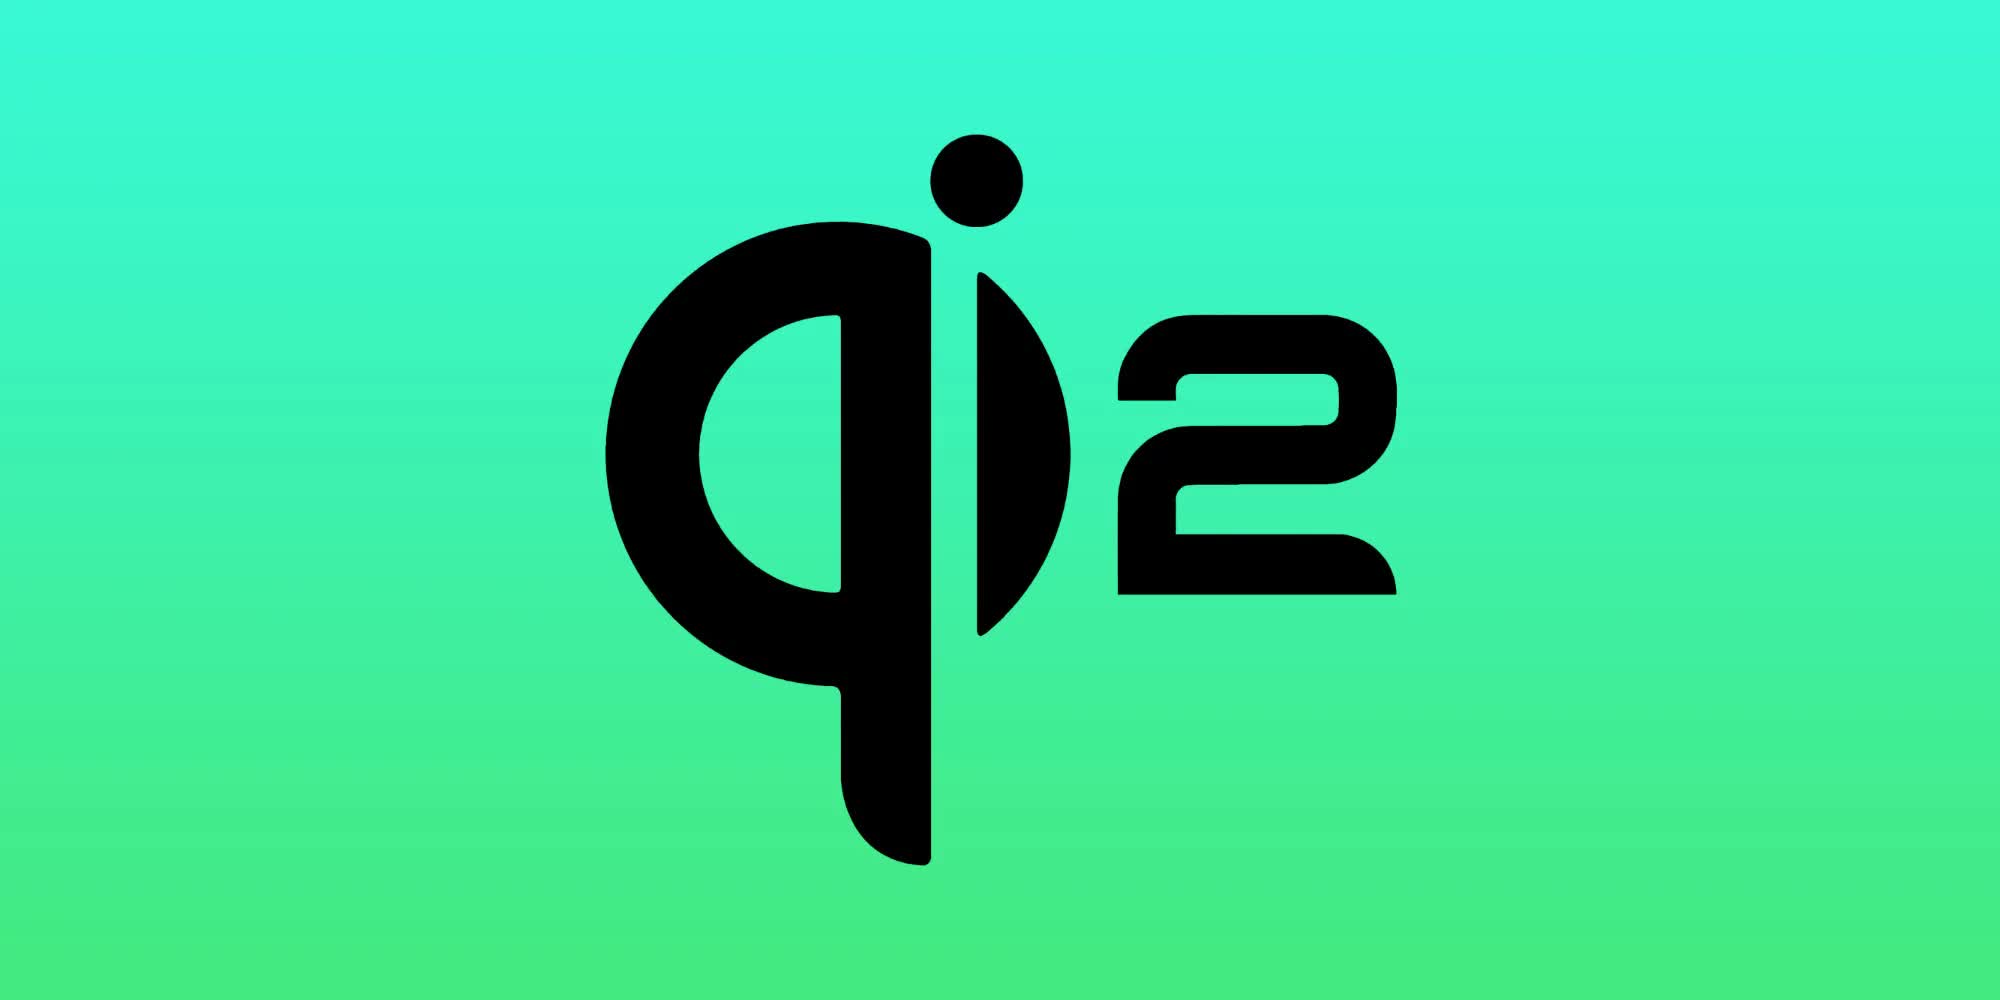 Qi2 standard will bring efficiency and interoperability to wireless charging